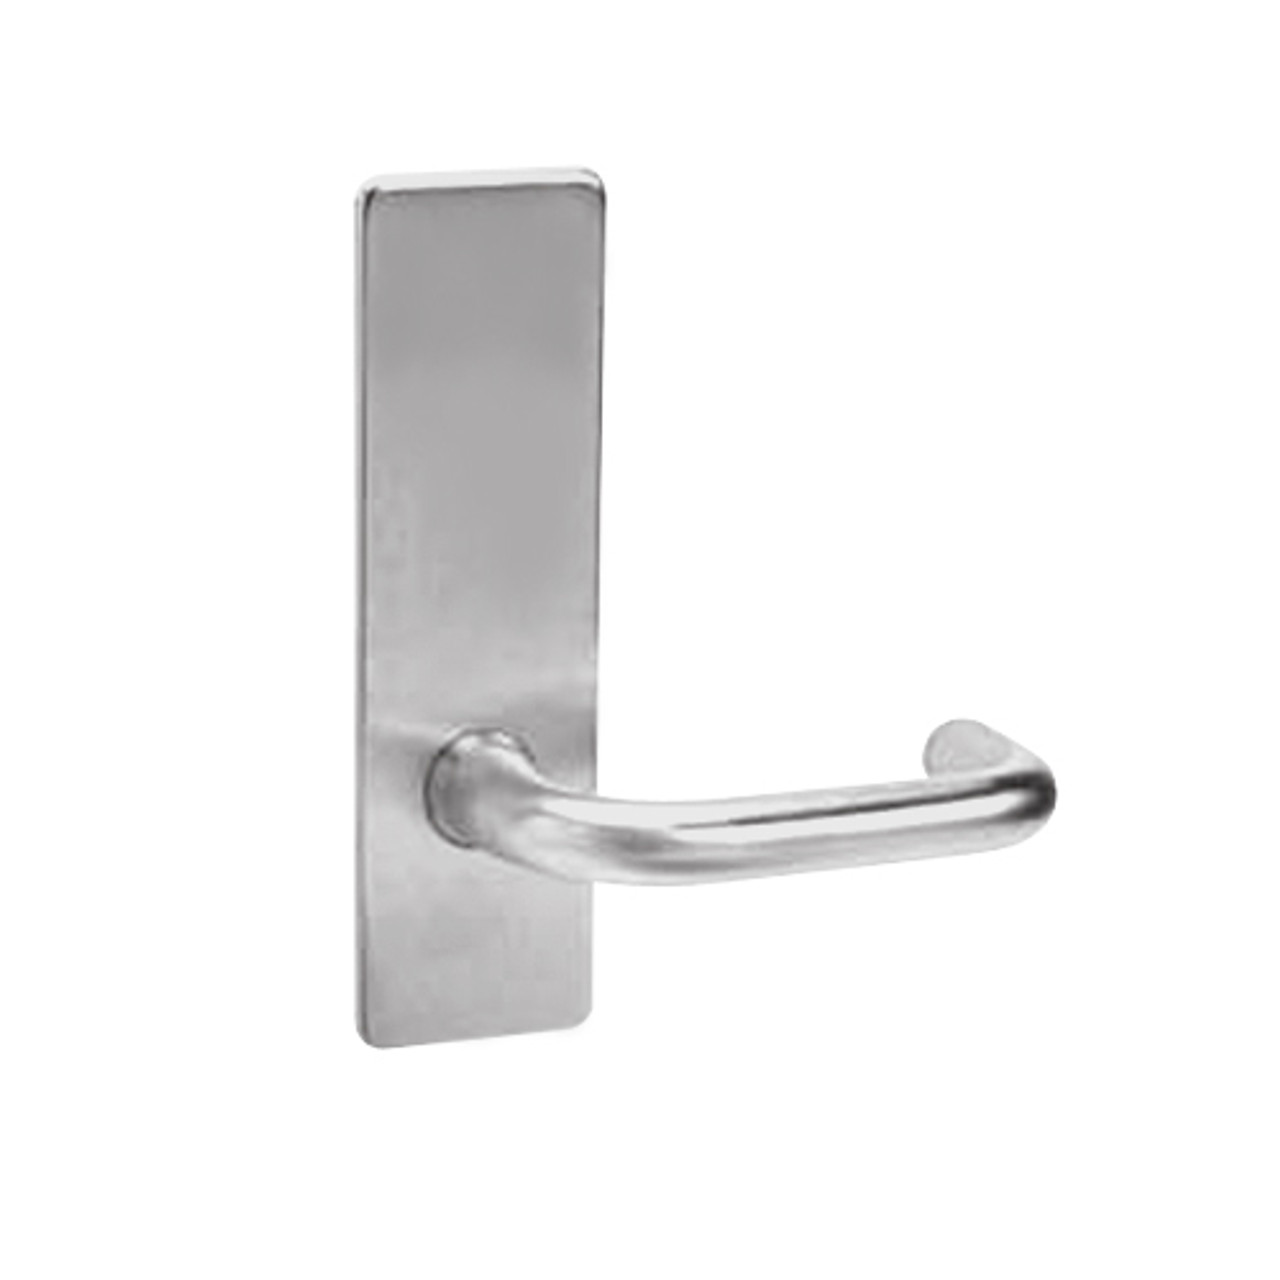 ML2060-LWM-630-M31 Corbin Russwin ML2000 Series Mortise Privacy Locksets with Lustra Lever in Satin Stainless